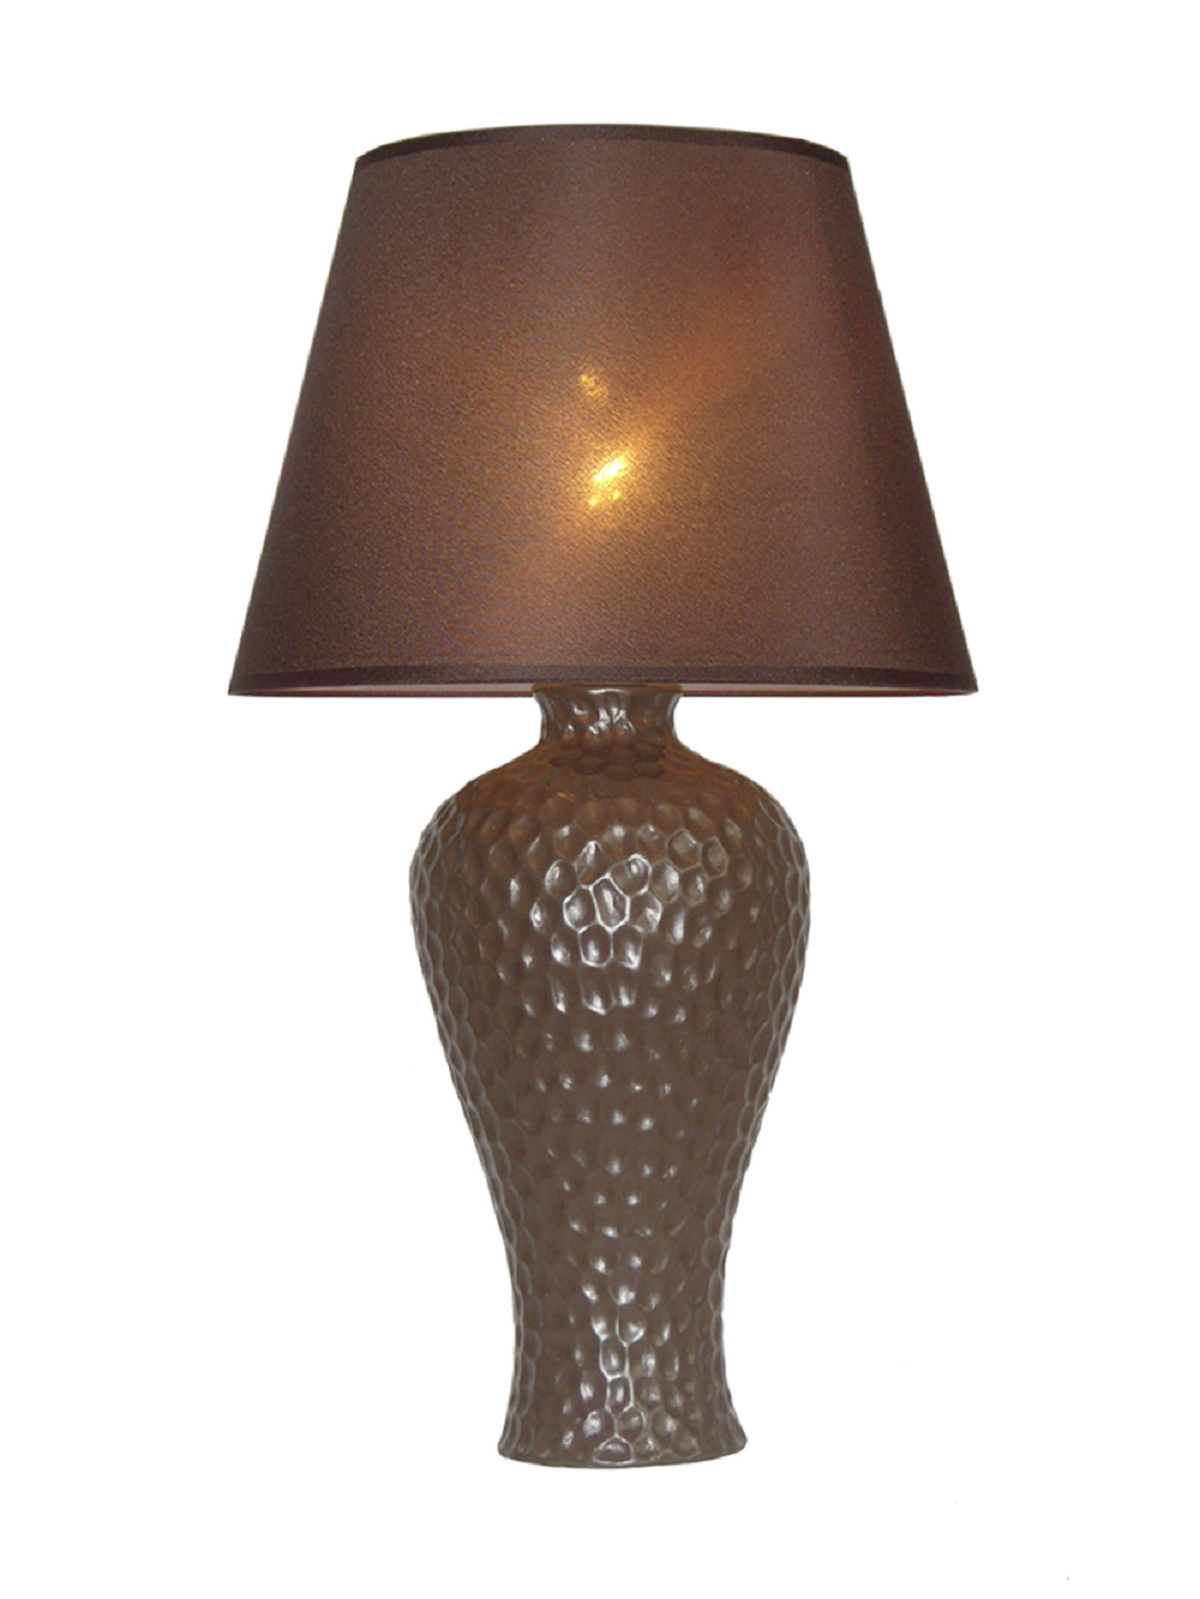 Simple Designs Brown Texturized Curvy Ceramic Table Lamp